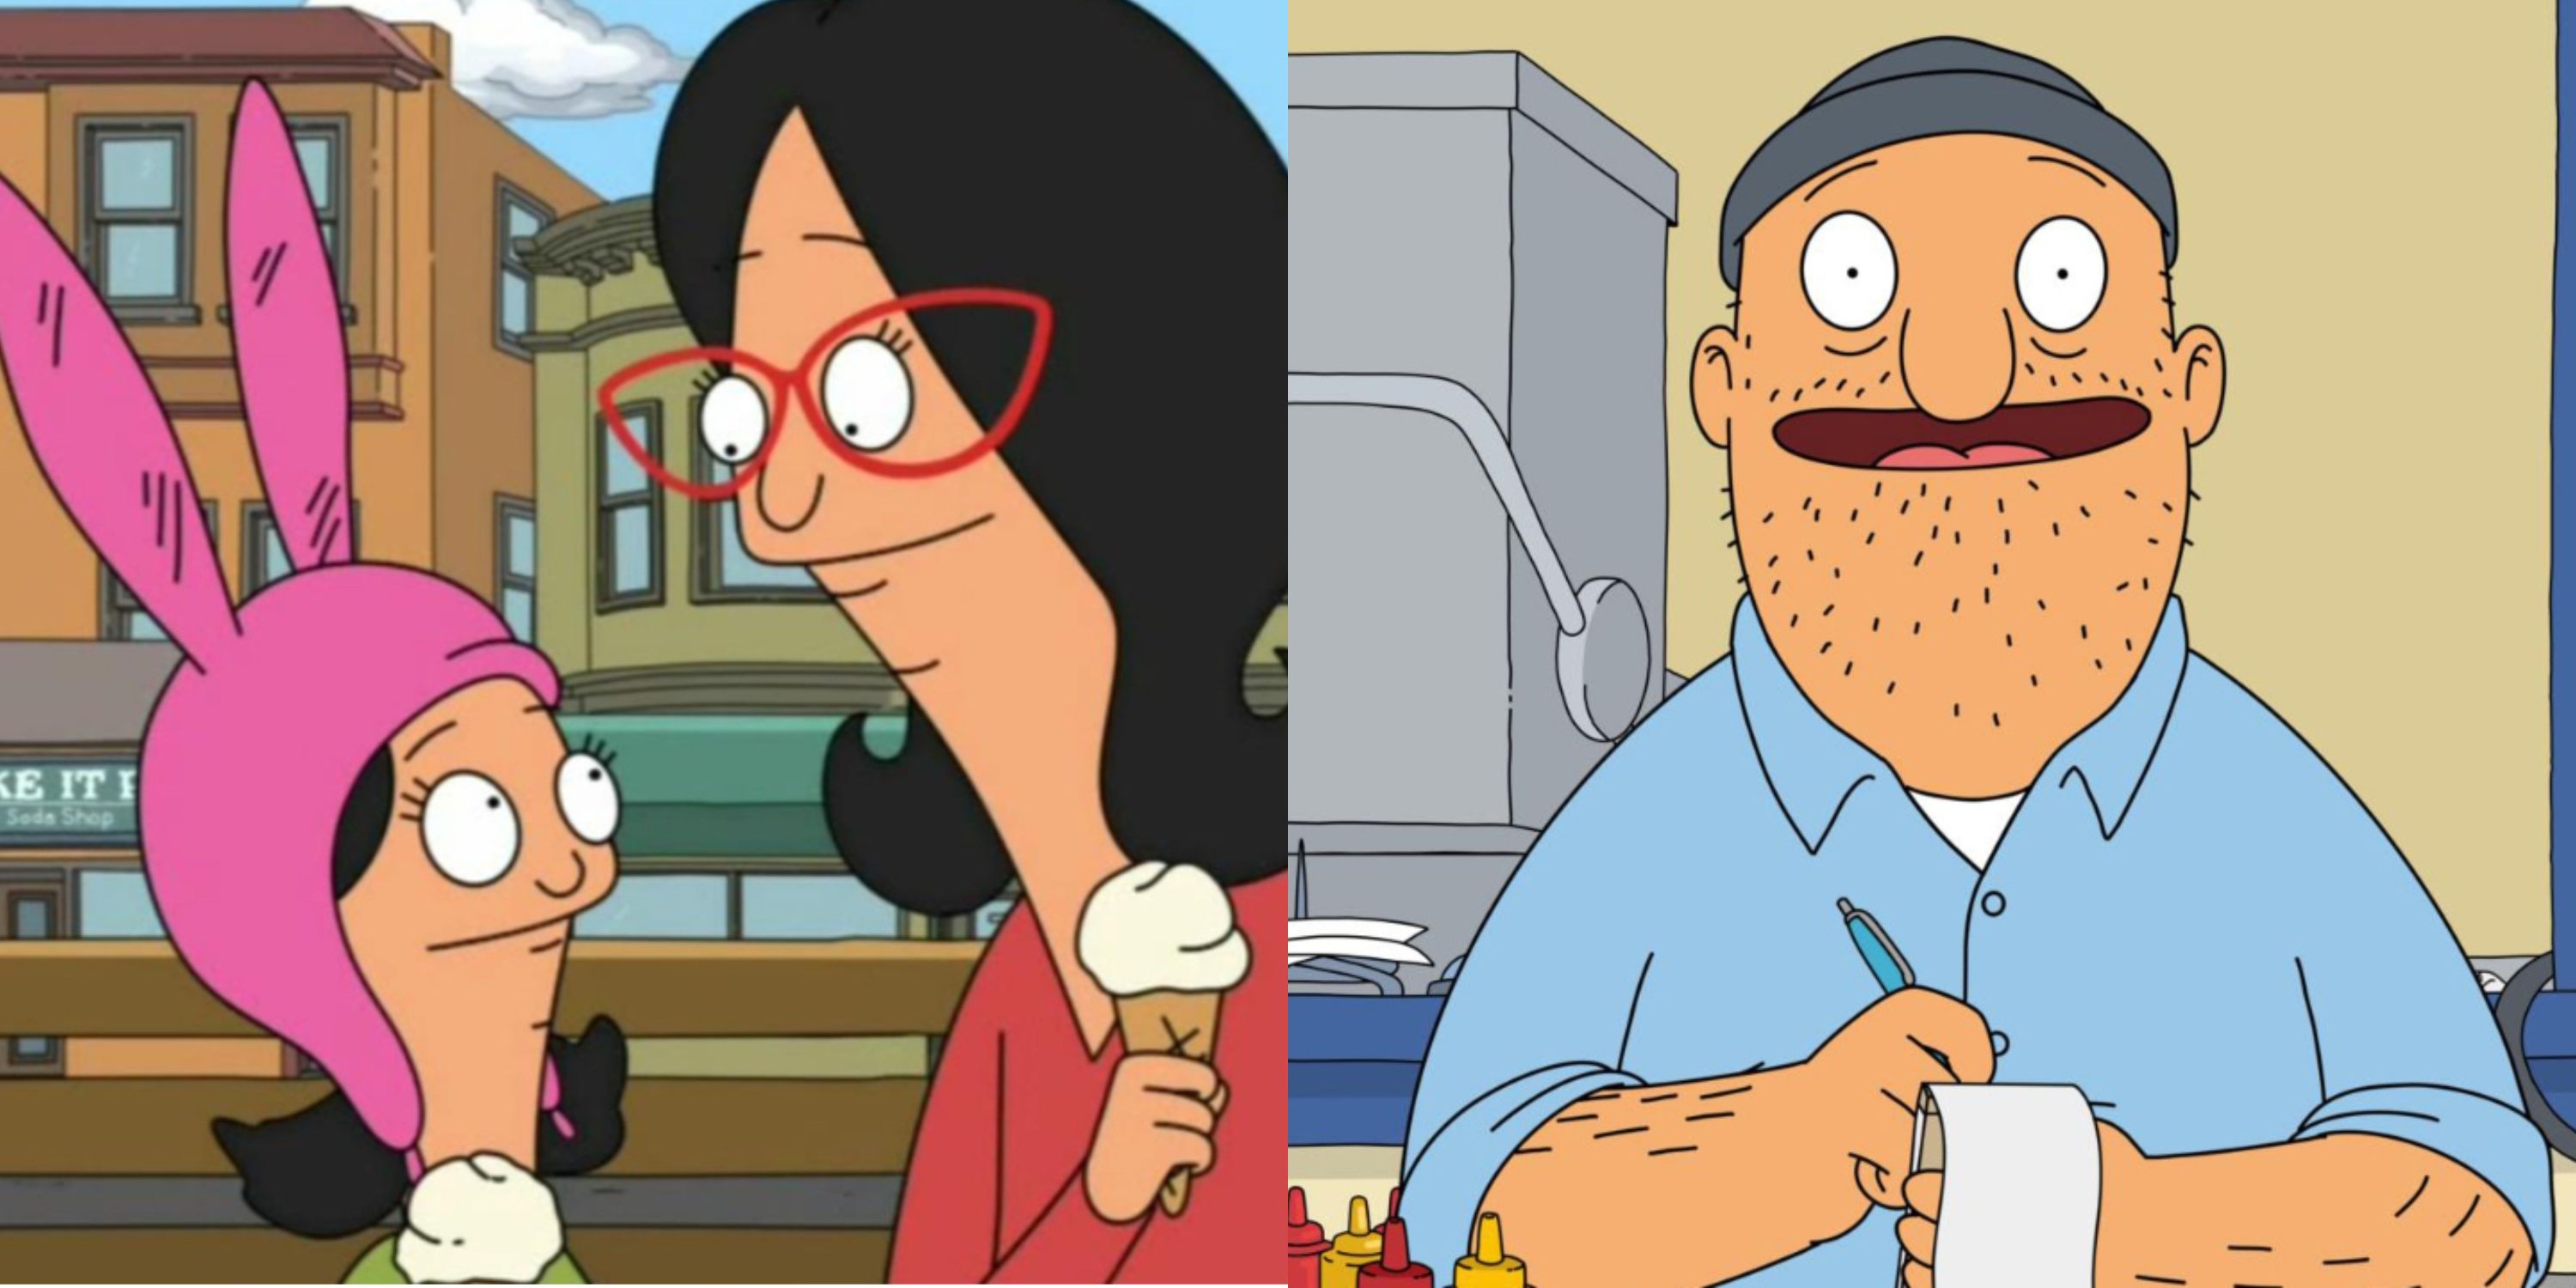 Featured image of Louise and Linda Belcher and Teddy in Bobs Burgers